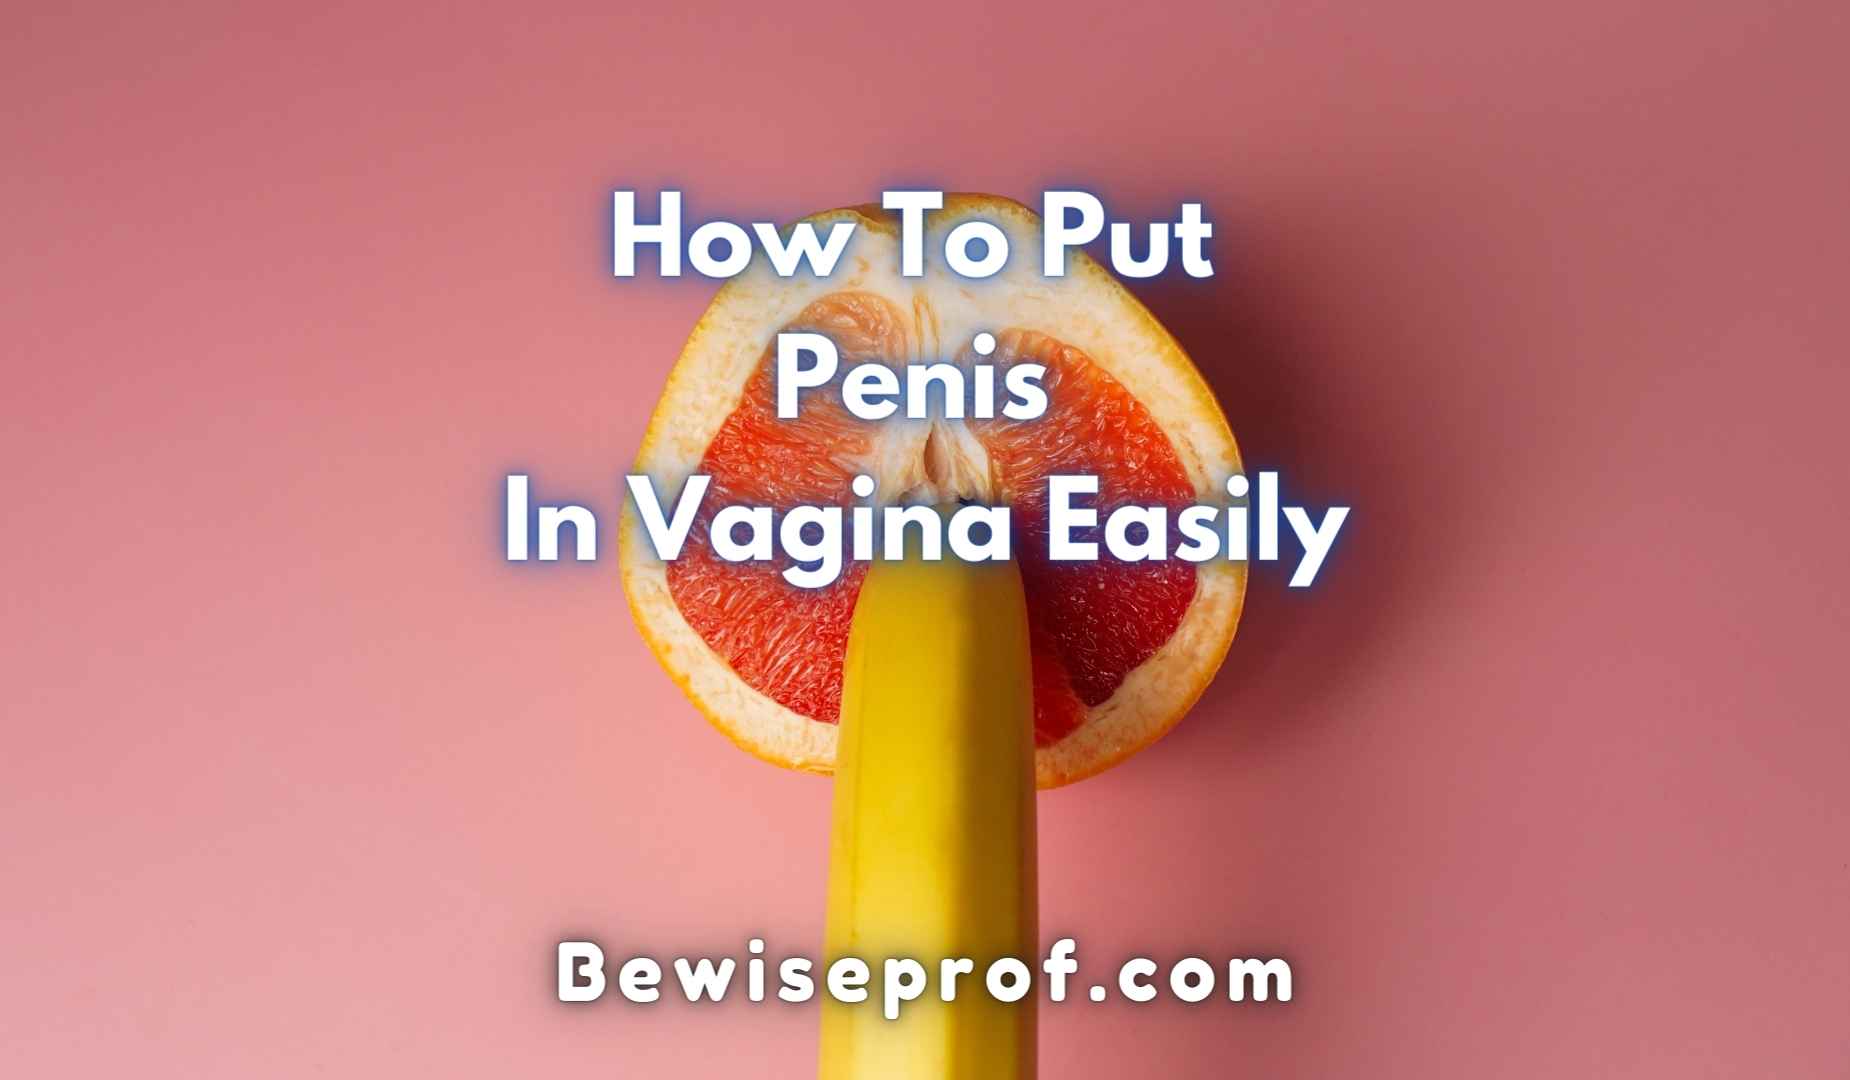 How To Put Penis In Vagina Easily